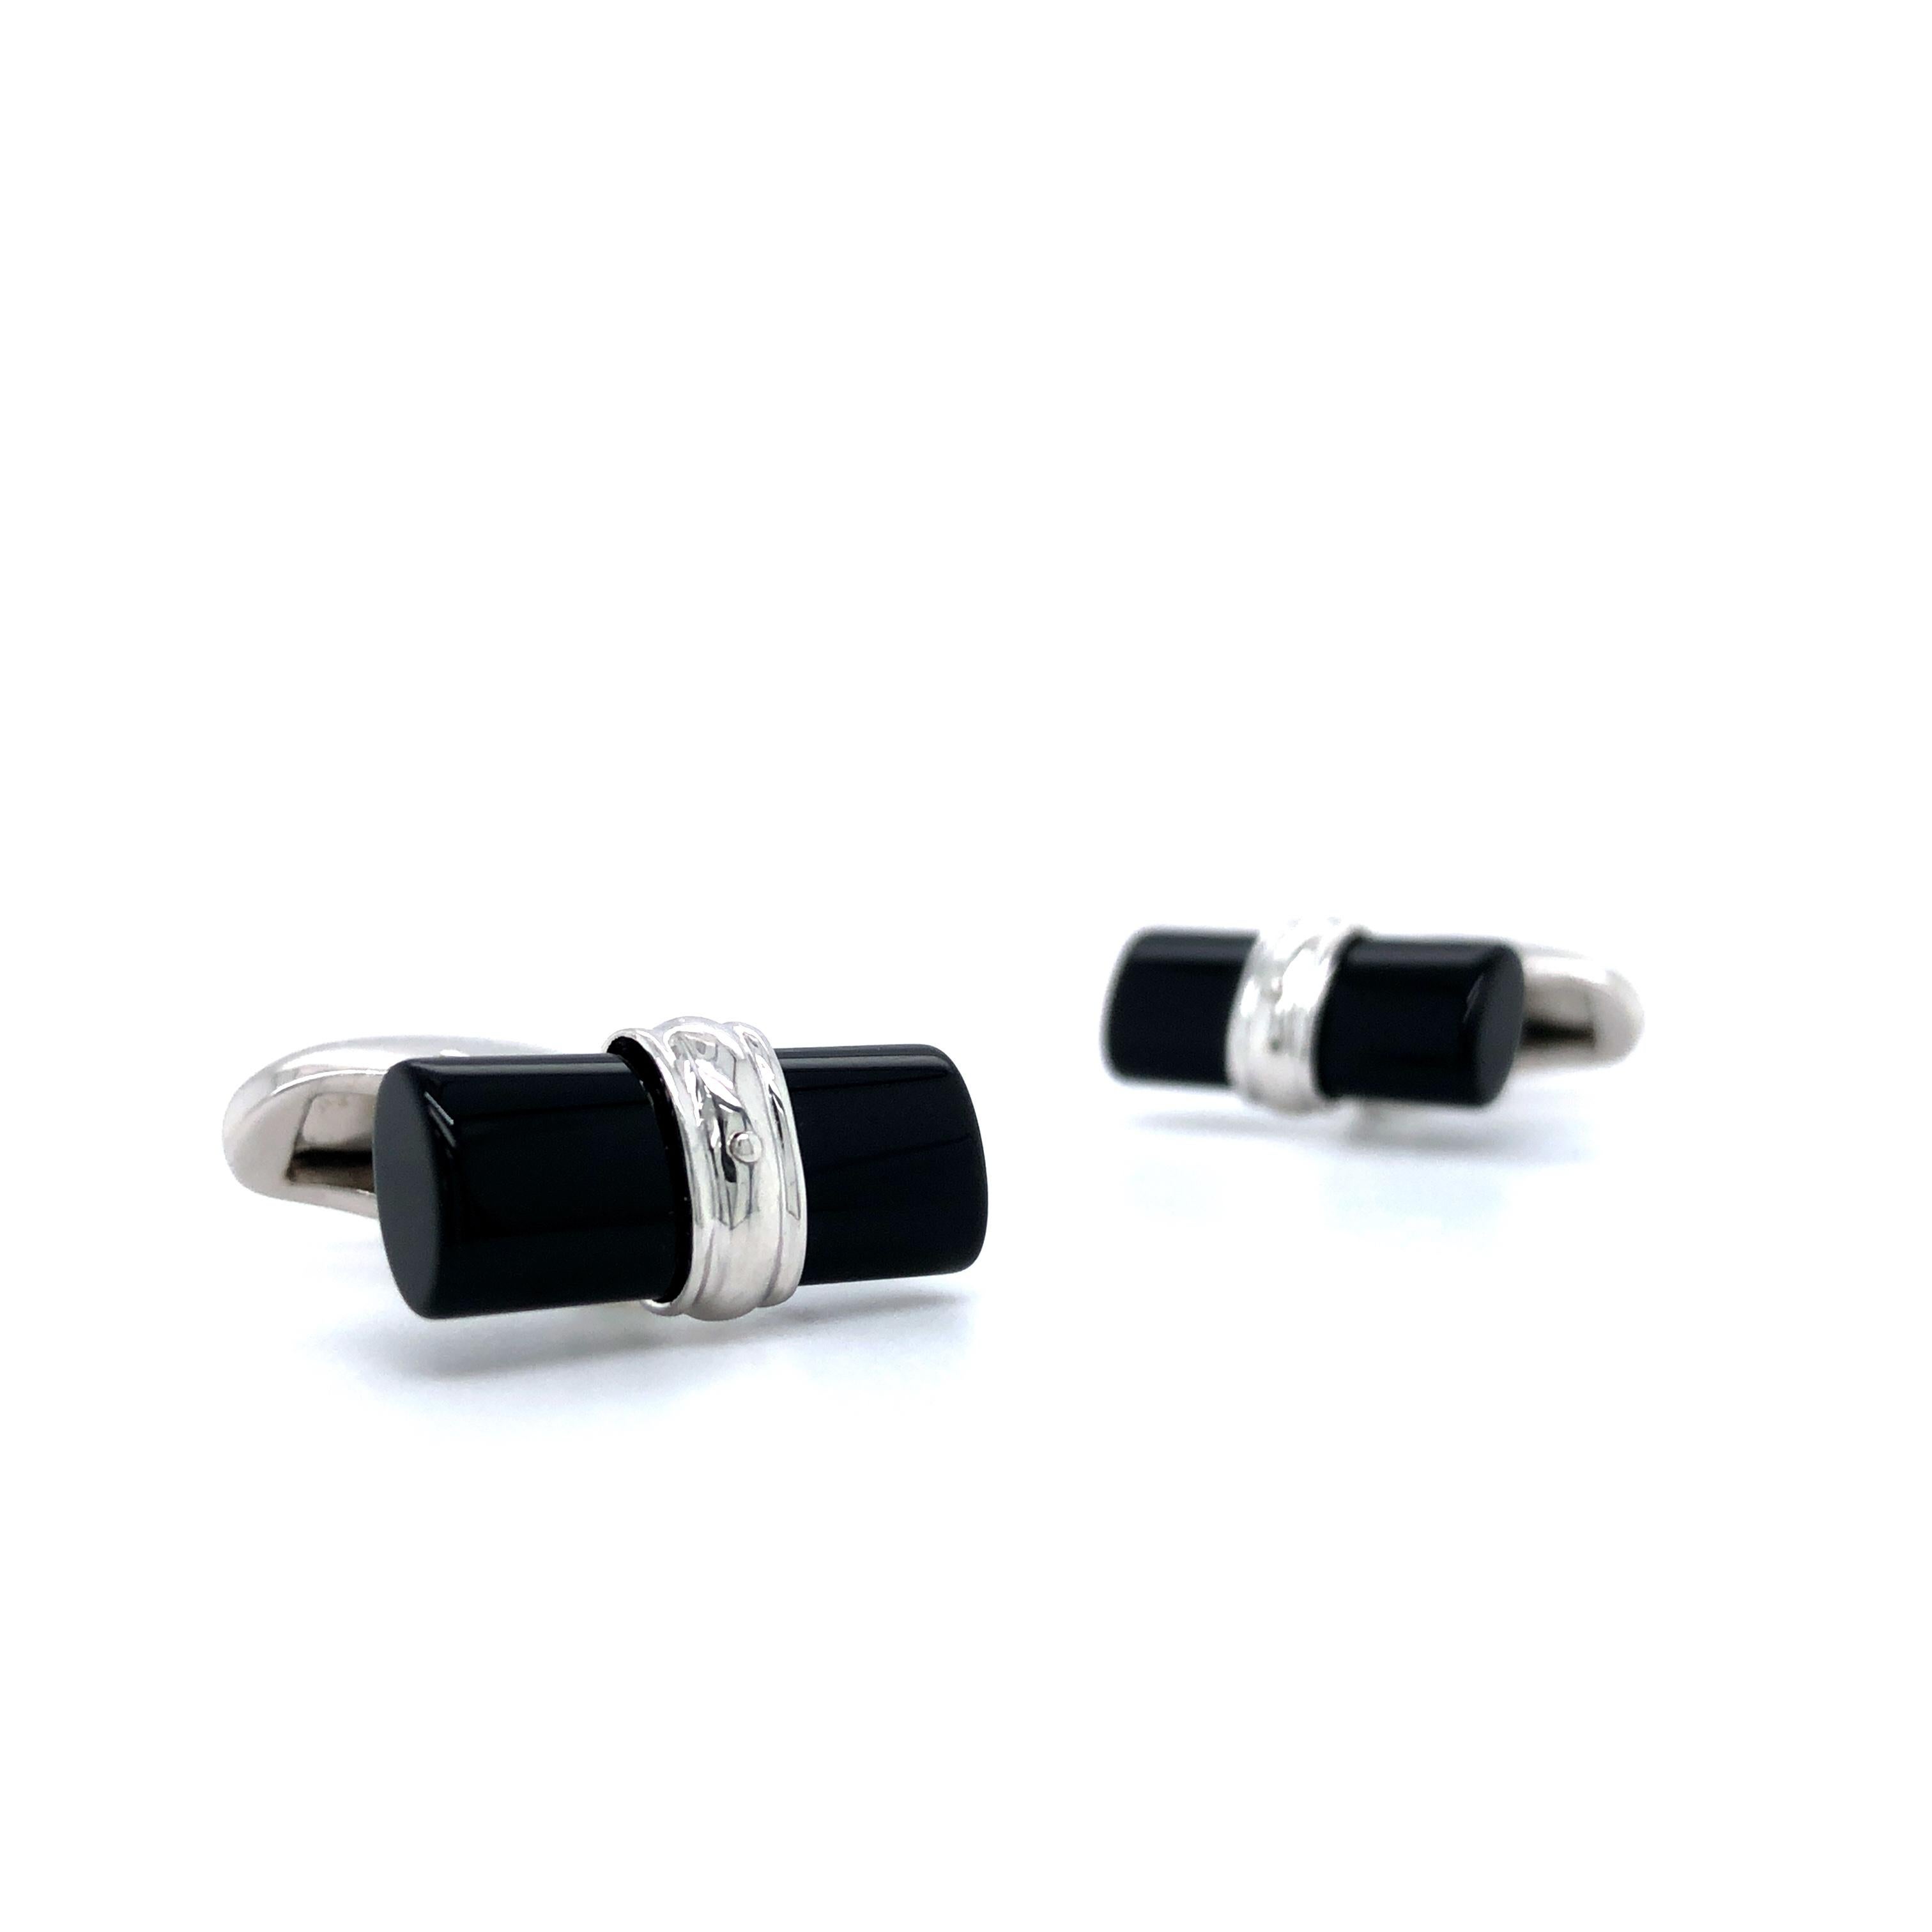 Victor Mayer cufflinks with cylindrical black onyx bars, Hallmark Collection, 18k white gold

About the creator Victor Mayer
Victor Mayer is internationally renowned for elegant timeless designs and unrivalled expertise in historic craftsmanship.